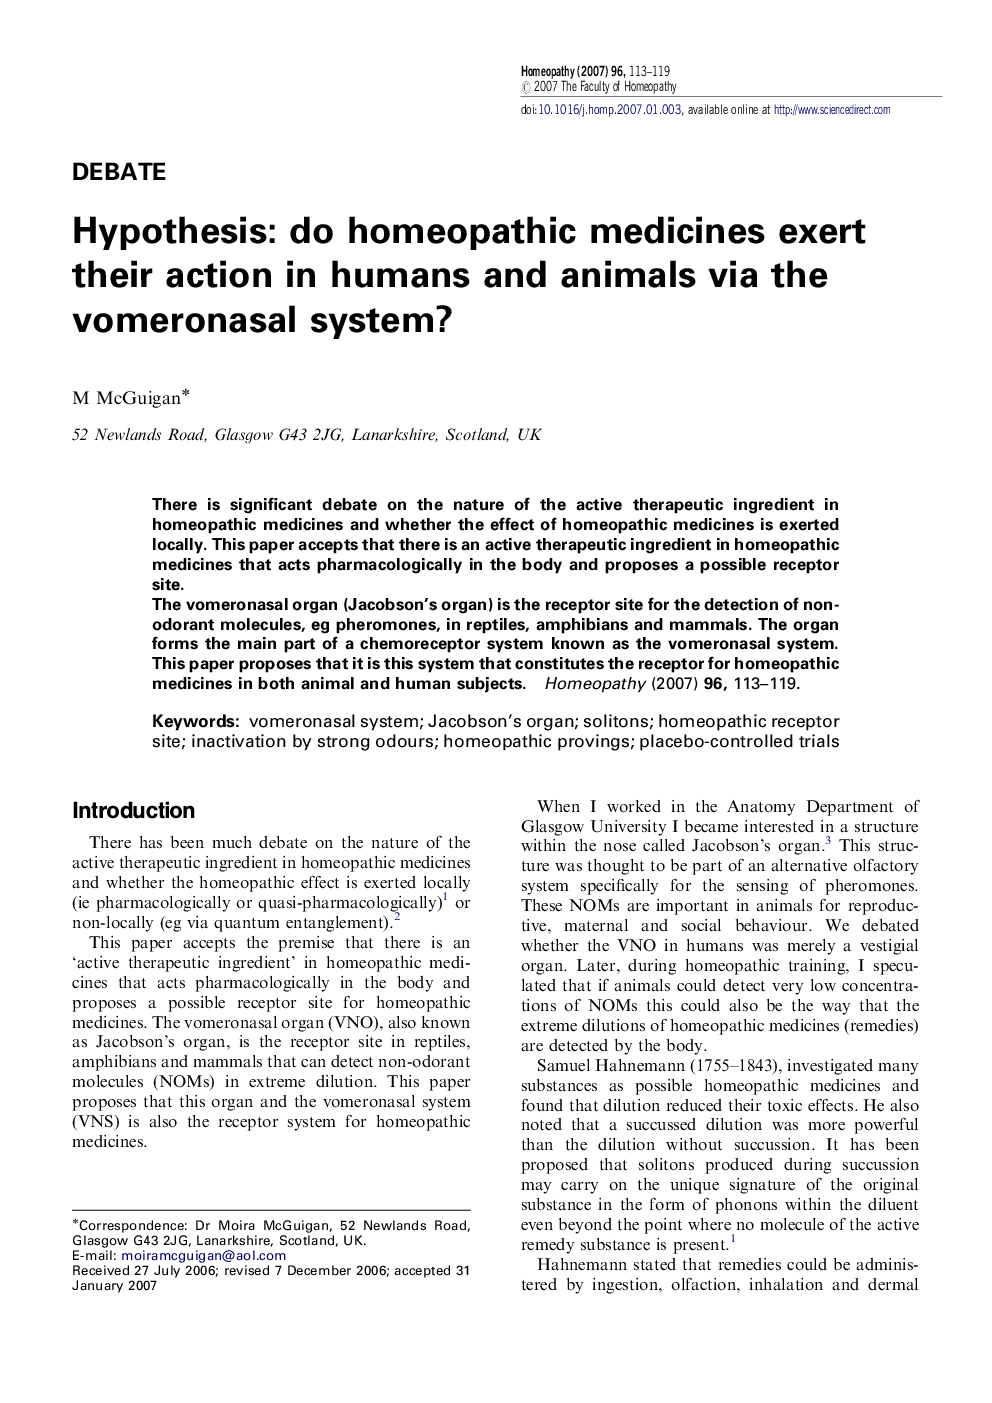 Hypothesis: do homeopathic medicines exert their action in humans and animals via the vomeronasal system?